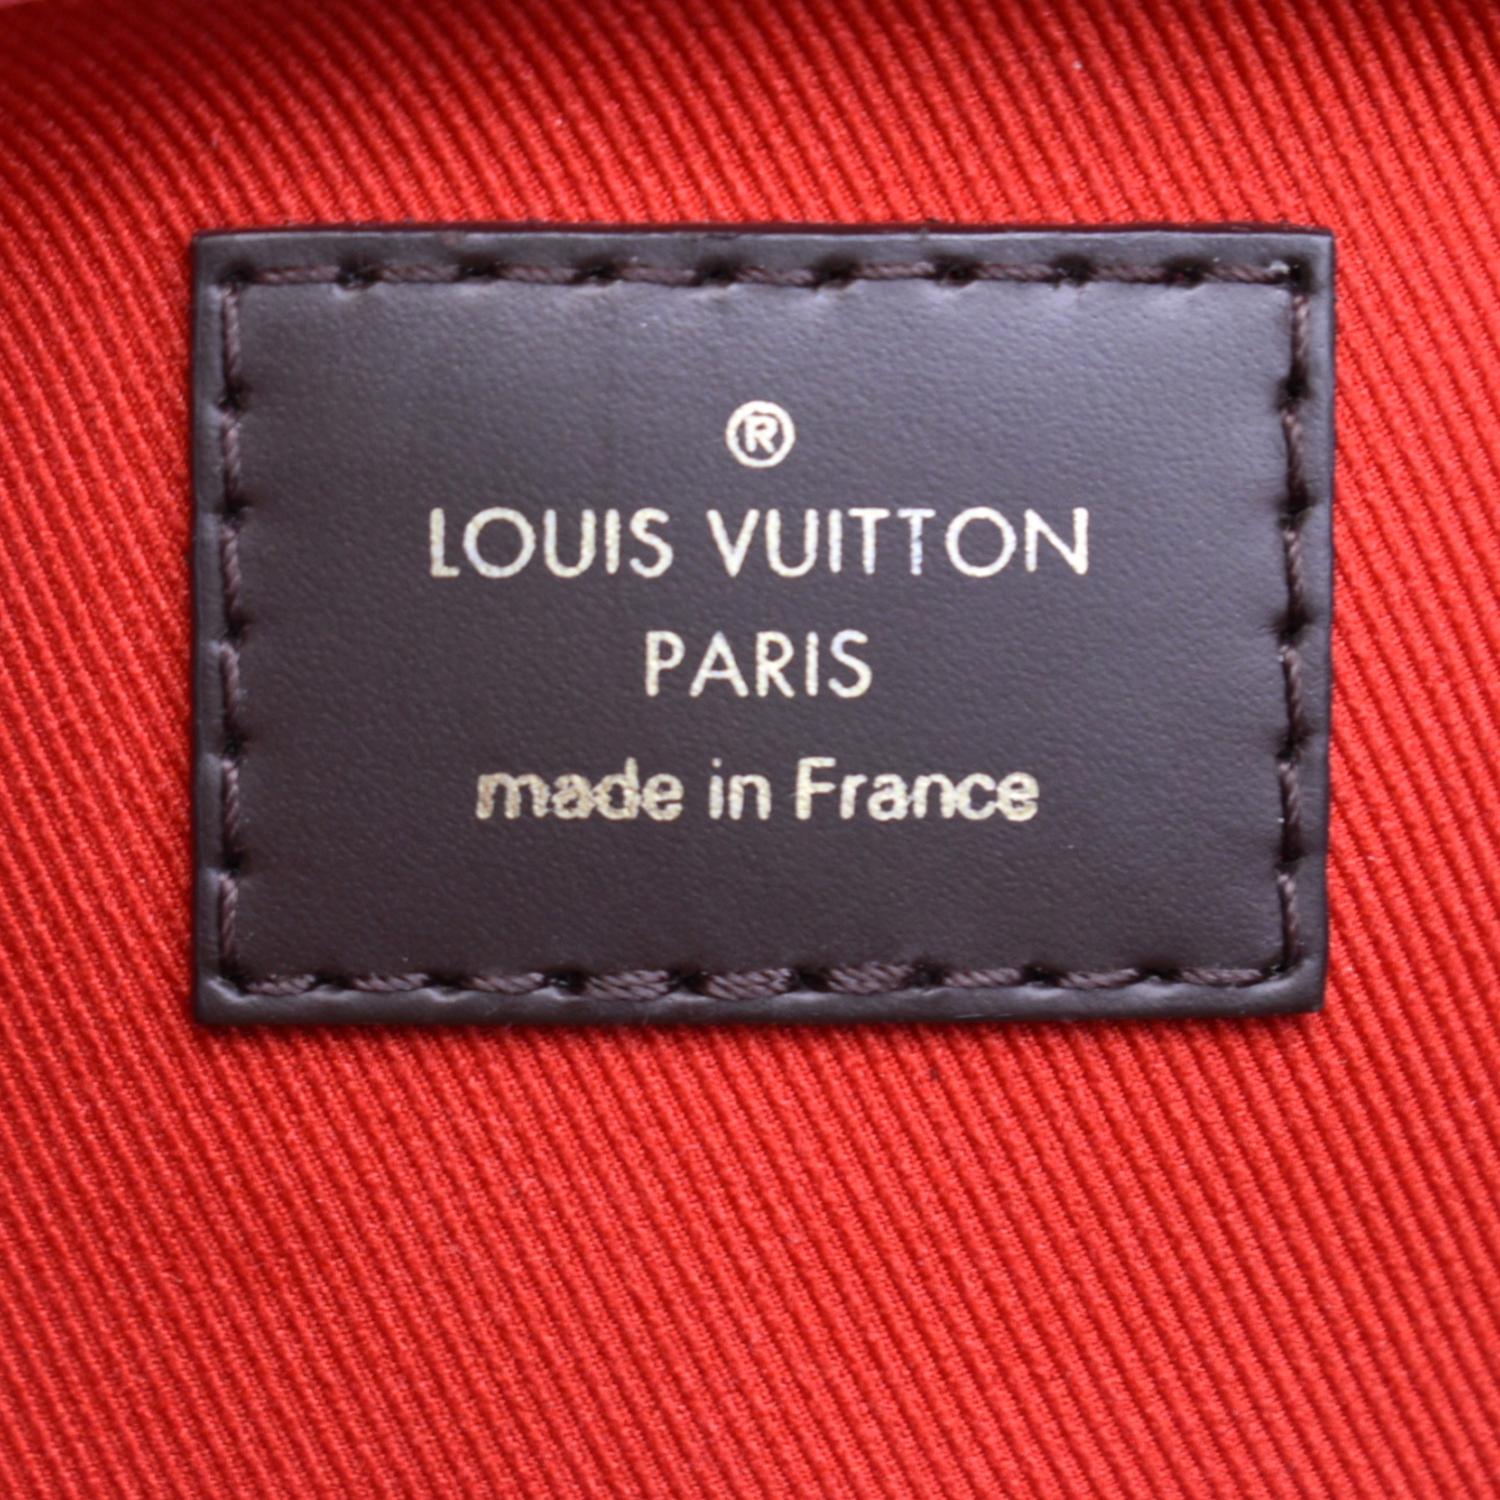 How to tell an AUTHENTIC Louis Vuitton bag from a FAKE one  Look at the  stamps  MISLUX